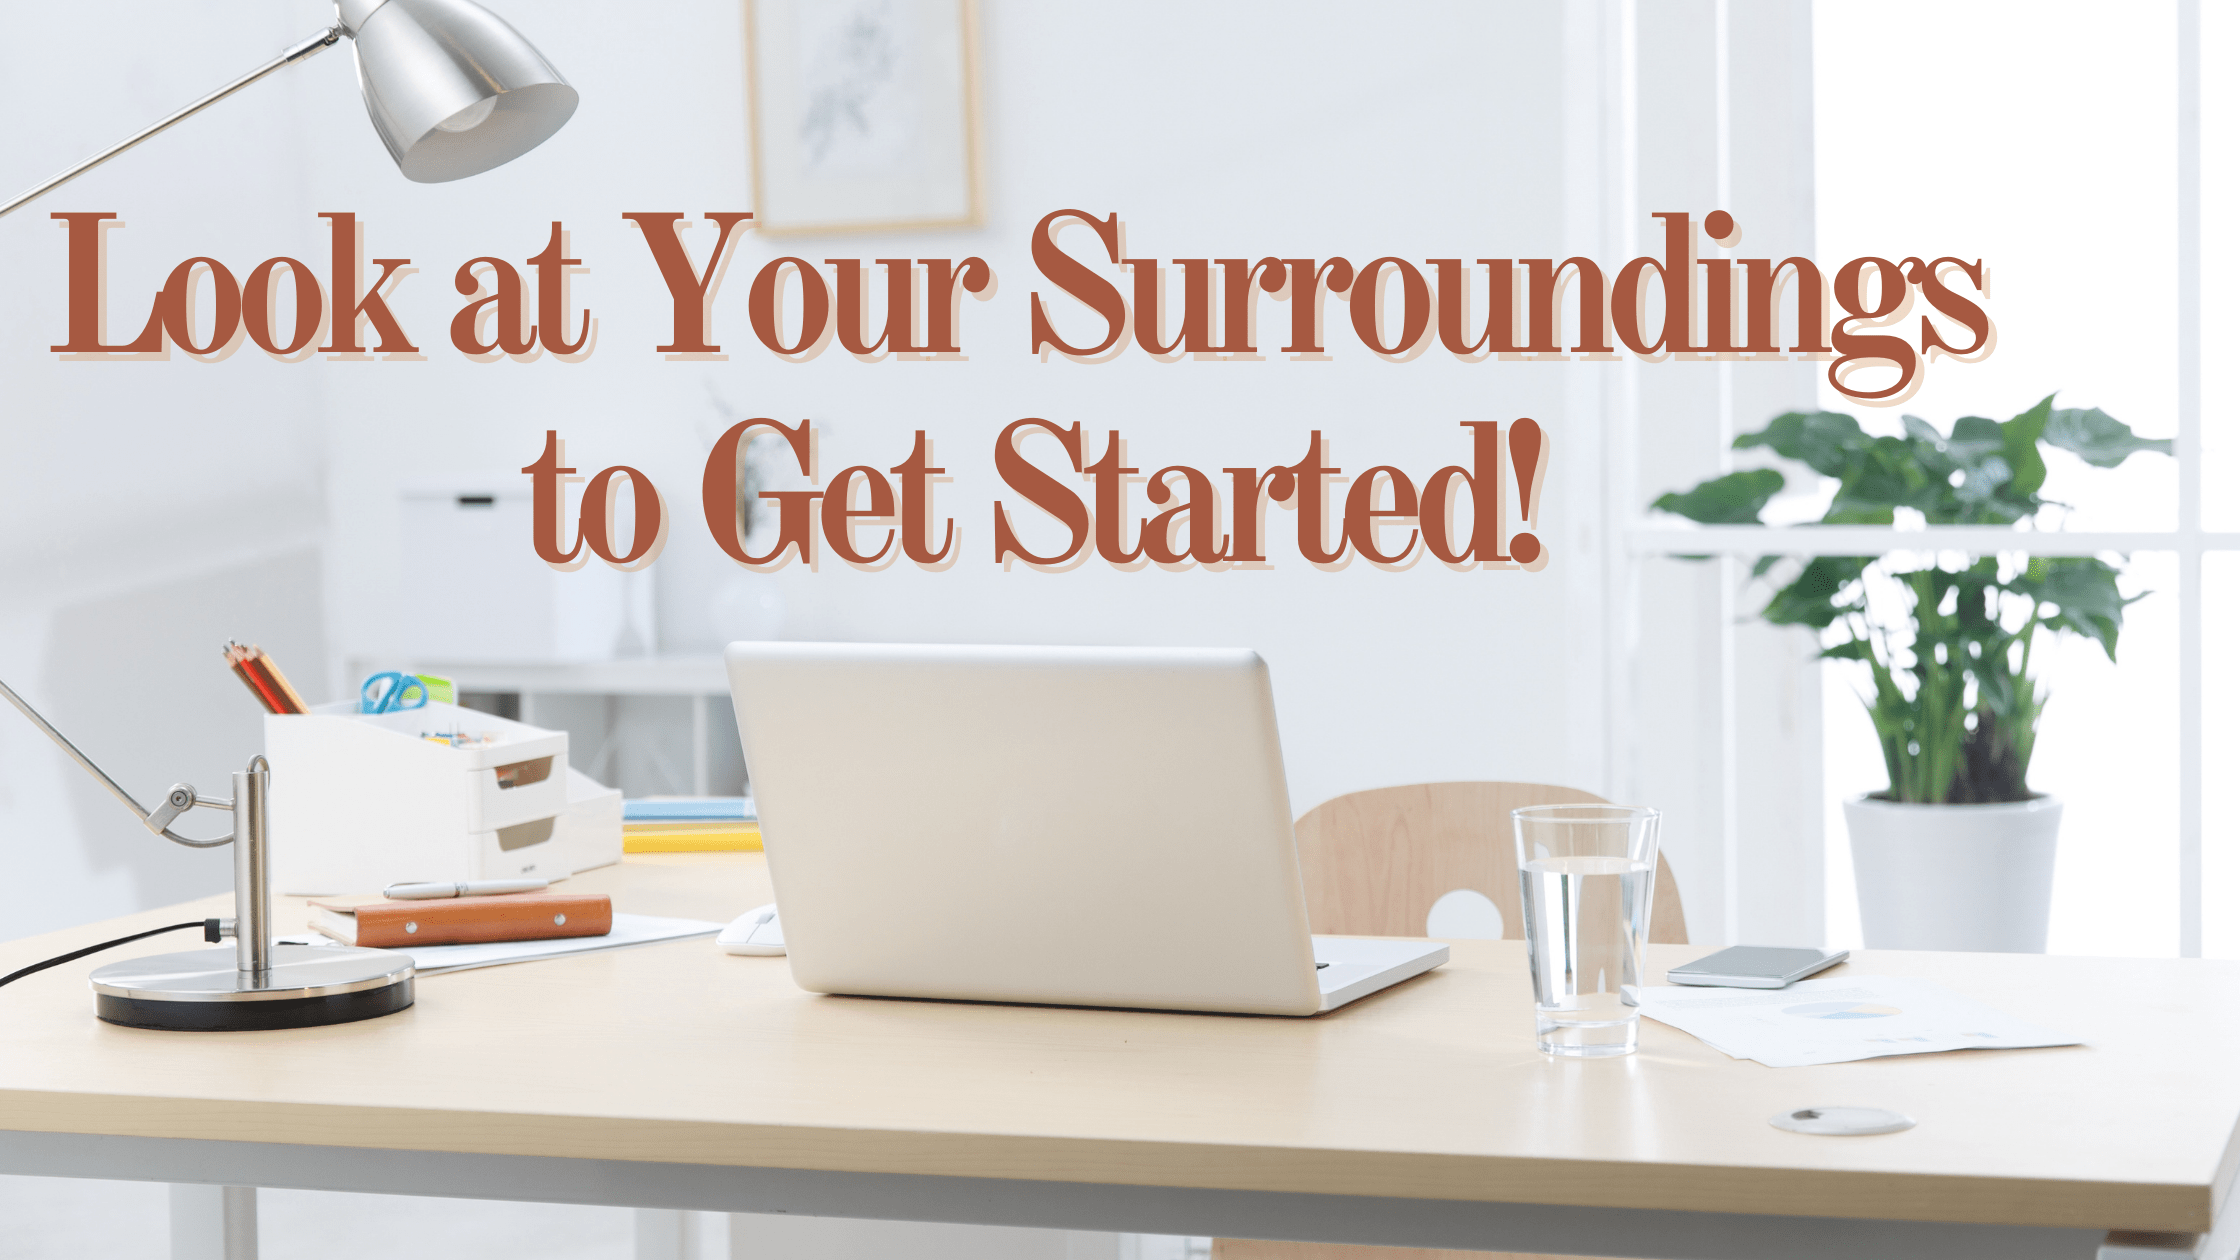 Look at Your Surroundings to Get Started